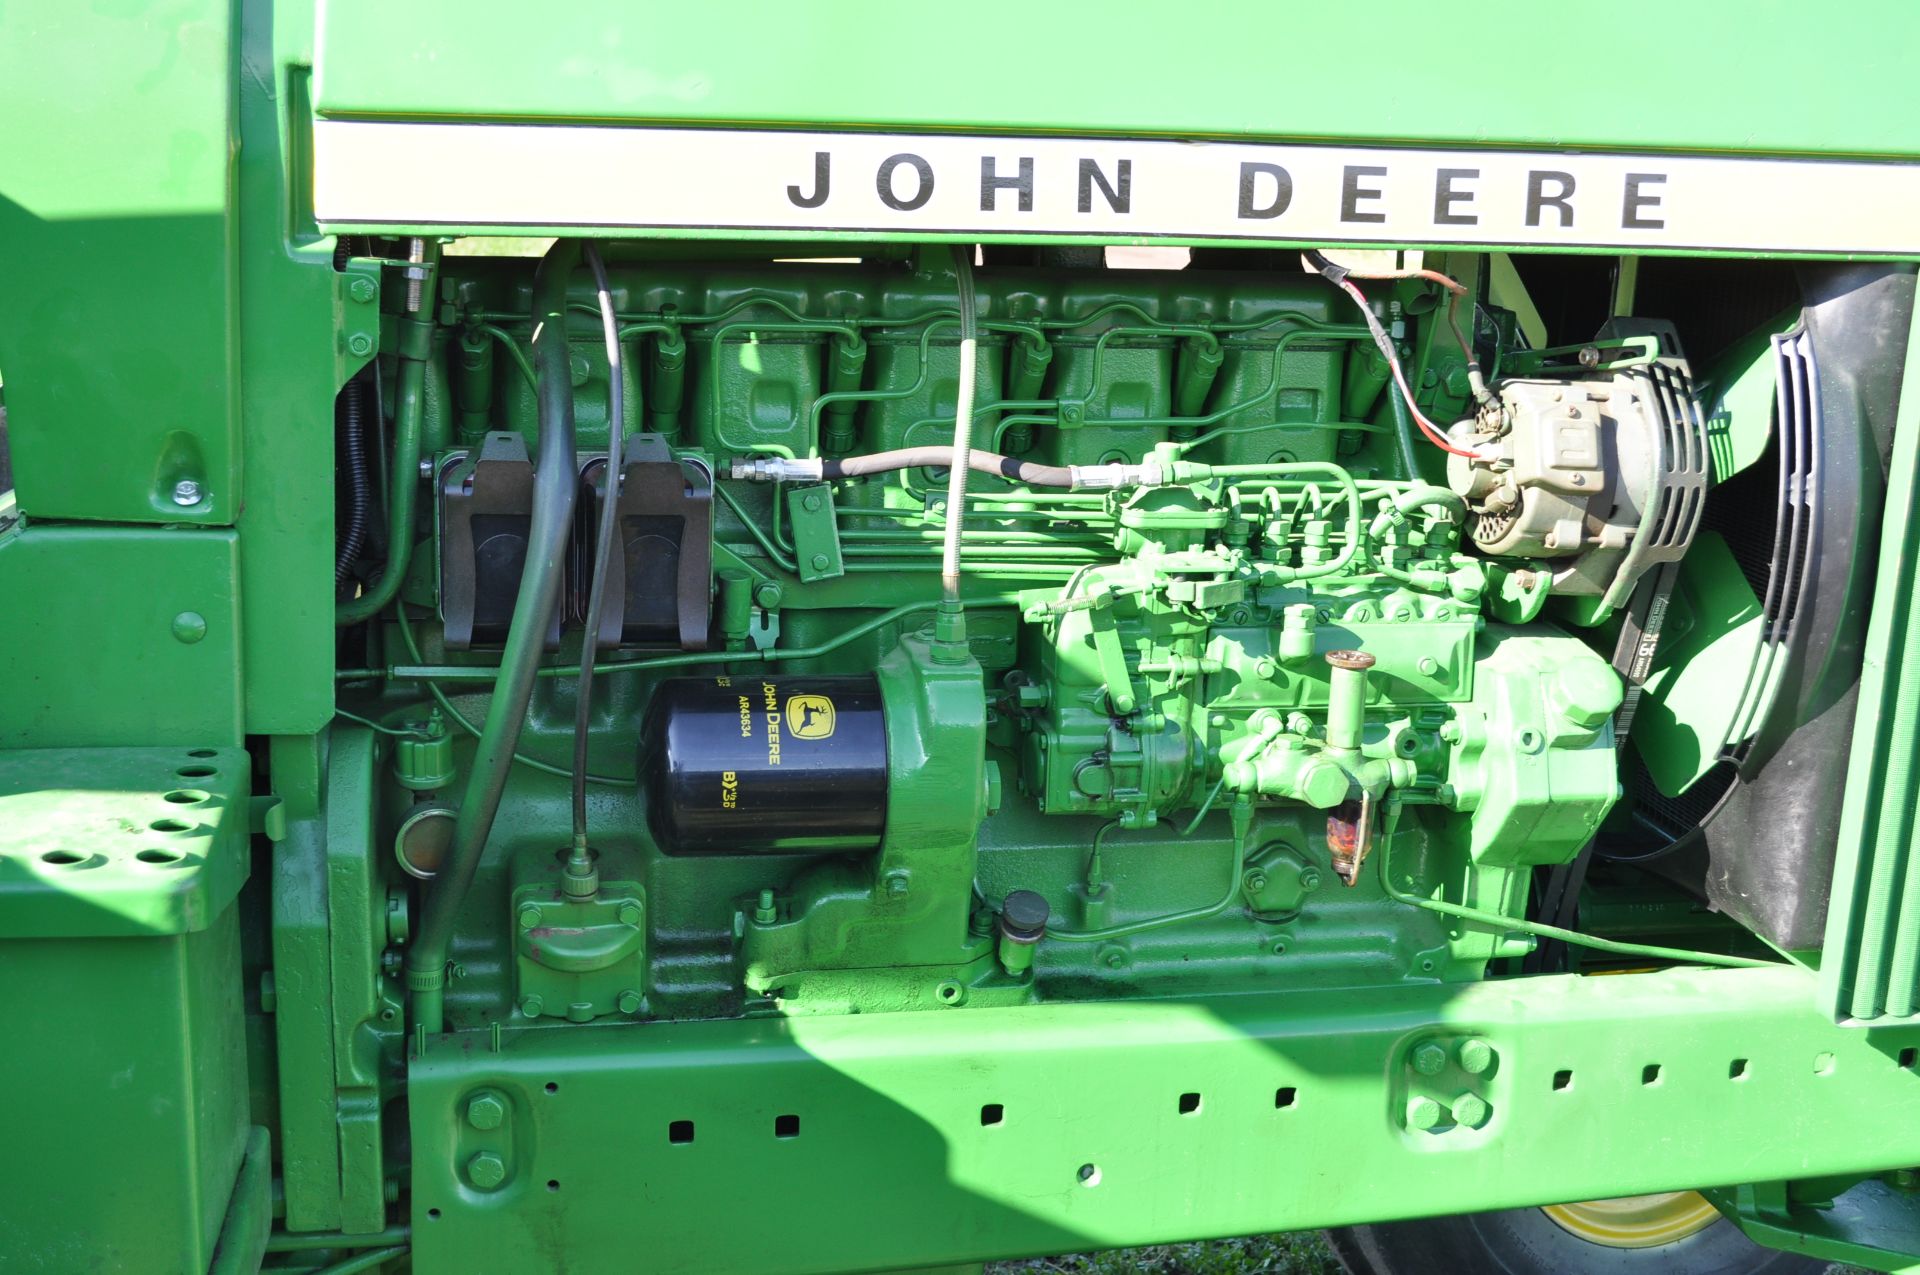 John Deere 4430 tractor, Syncro-Range trans, dual hydr, 3-pt, 540/1000 PTO, 18.4-38 rears & 11.00-18 - Image 11 of 21